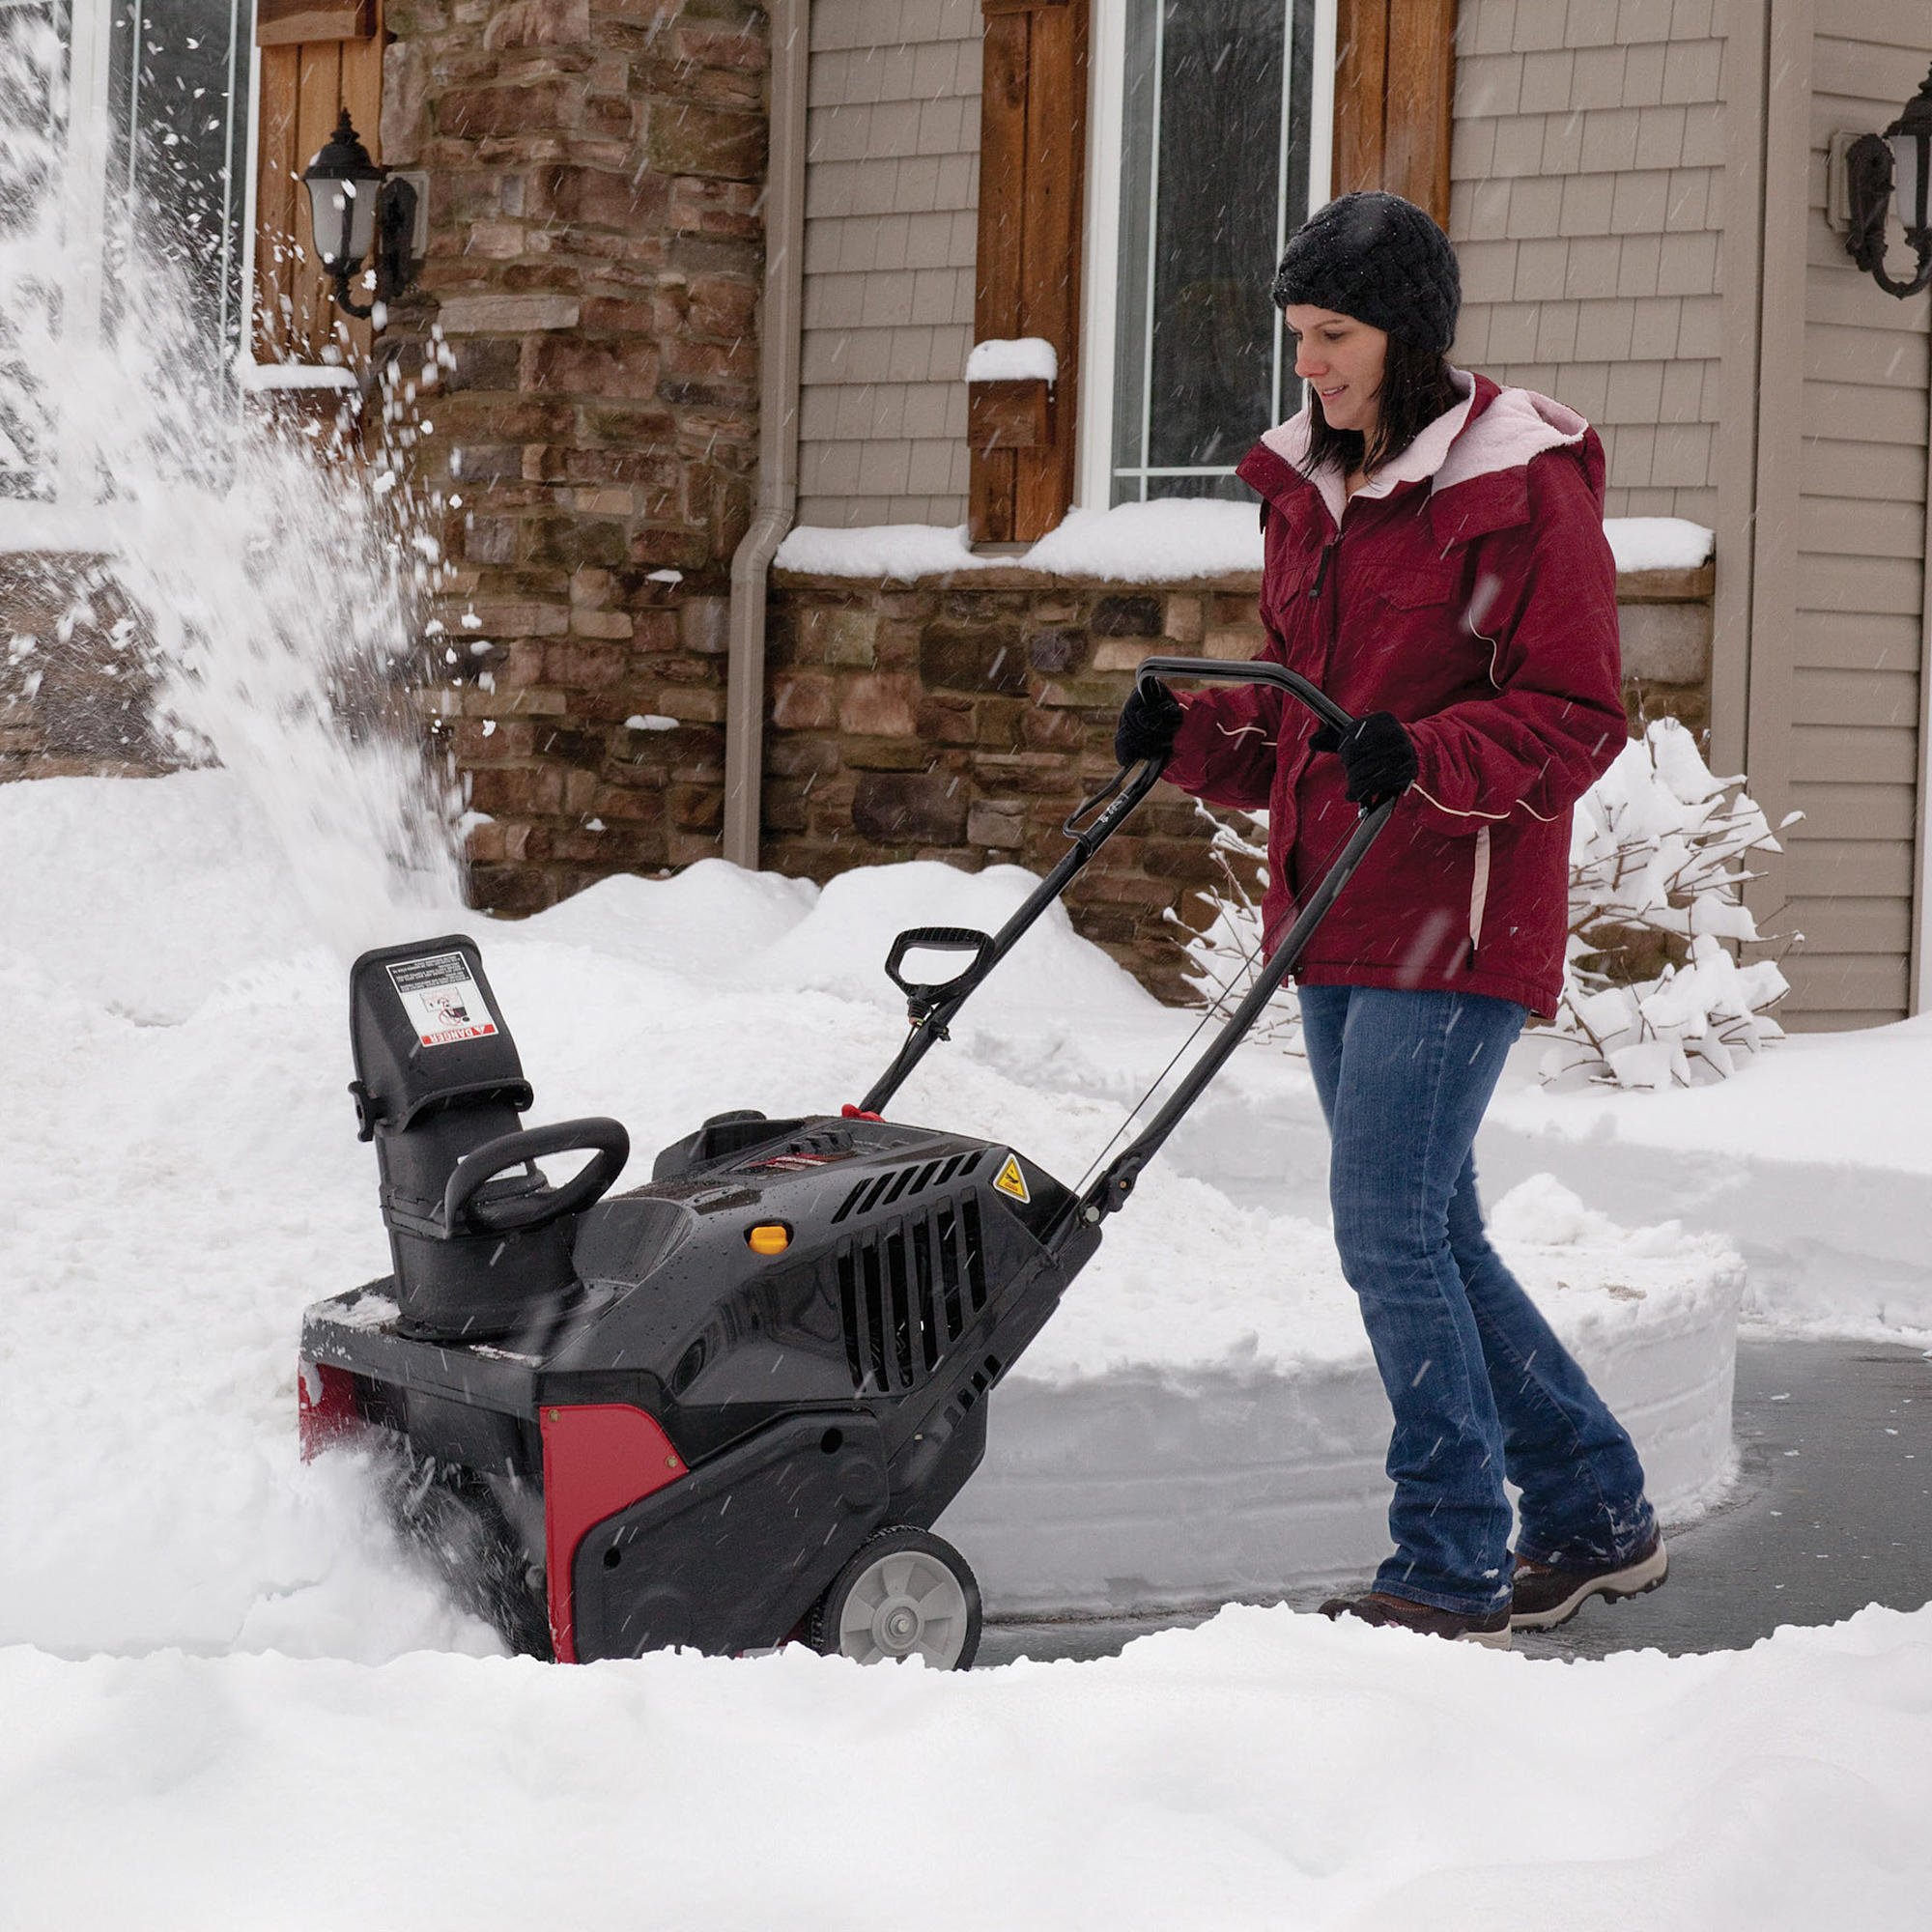 How to make my snowblower throw snow farther